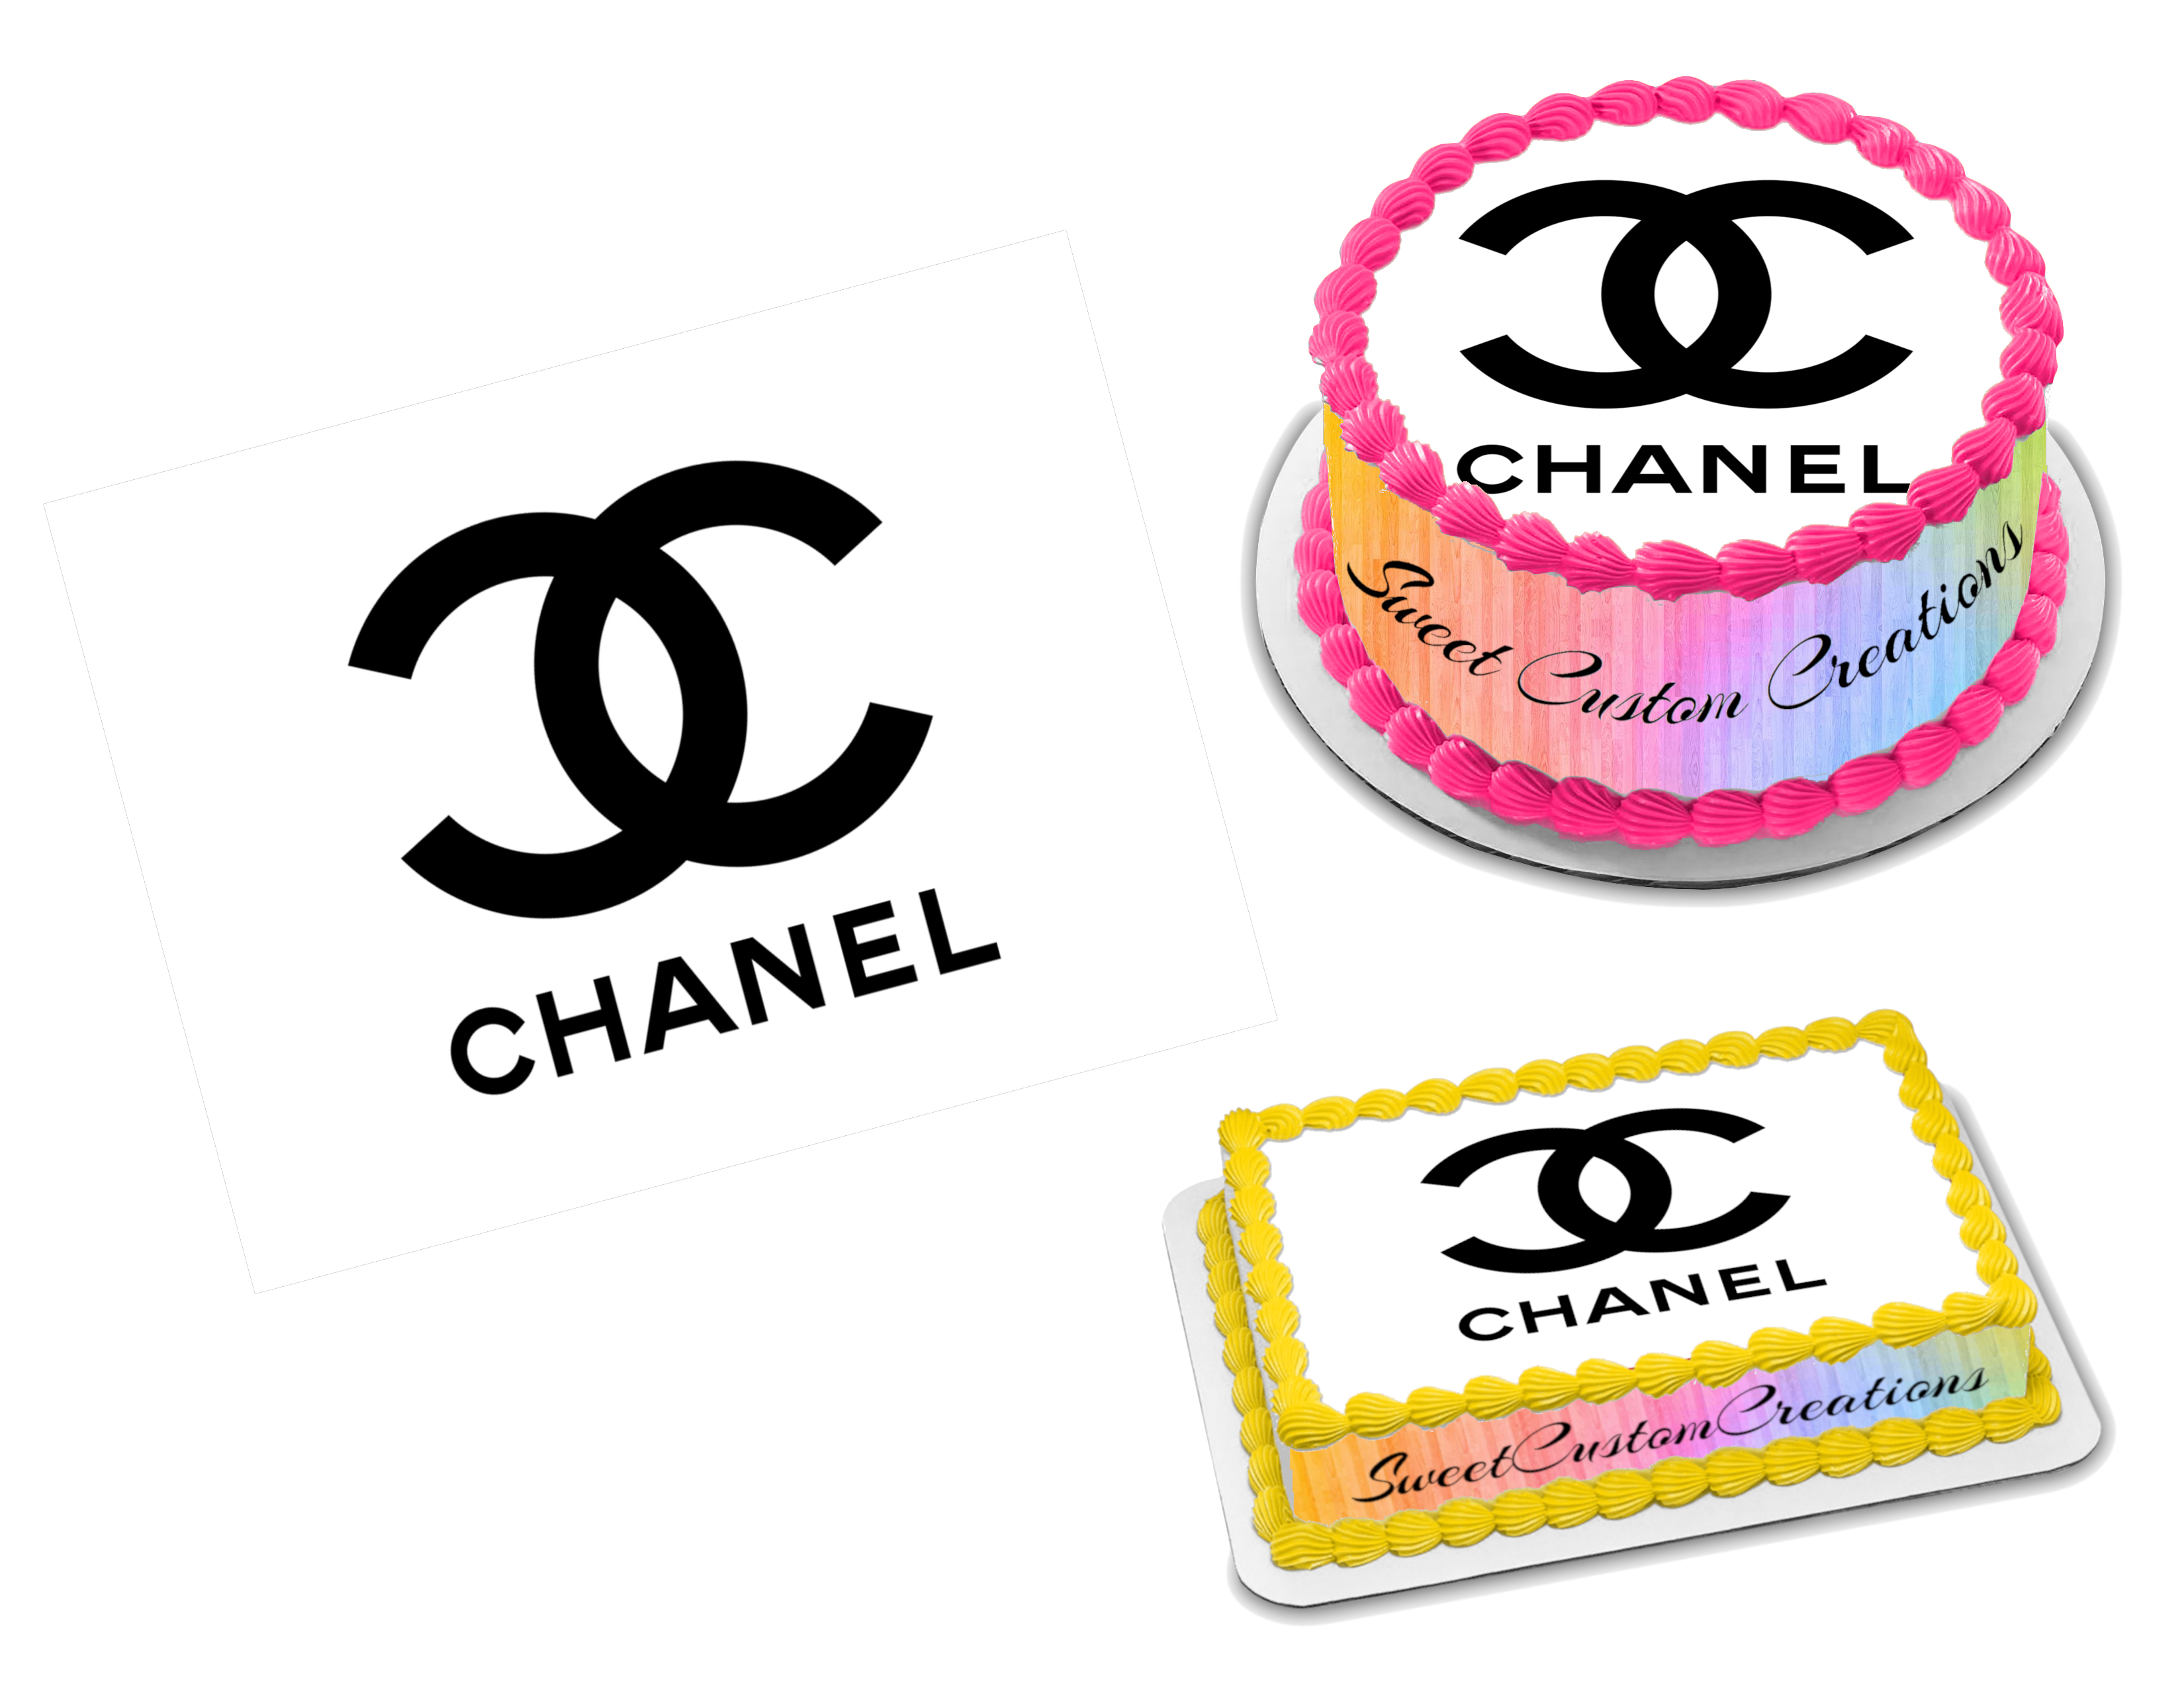 The Cake Warehouse - Chanel cupcake toppers